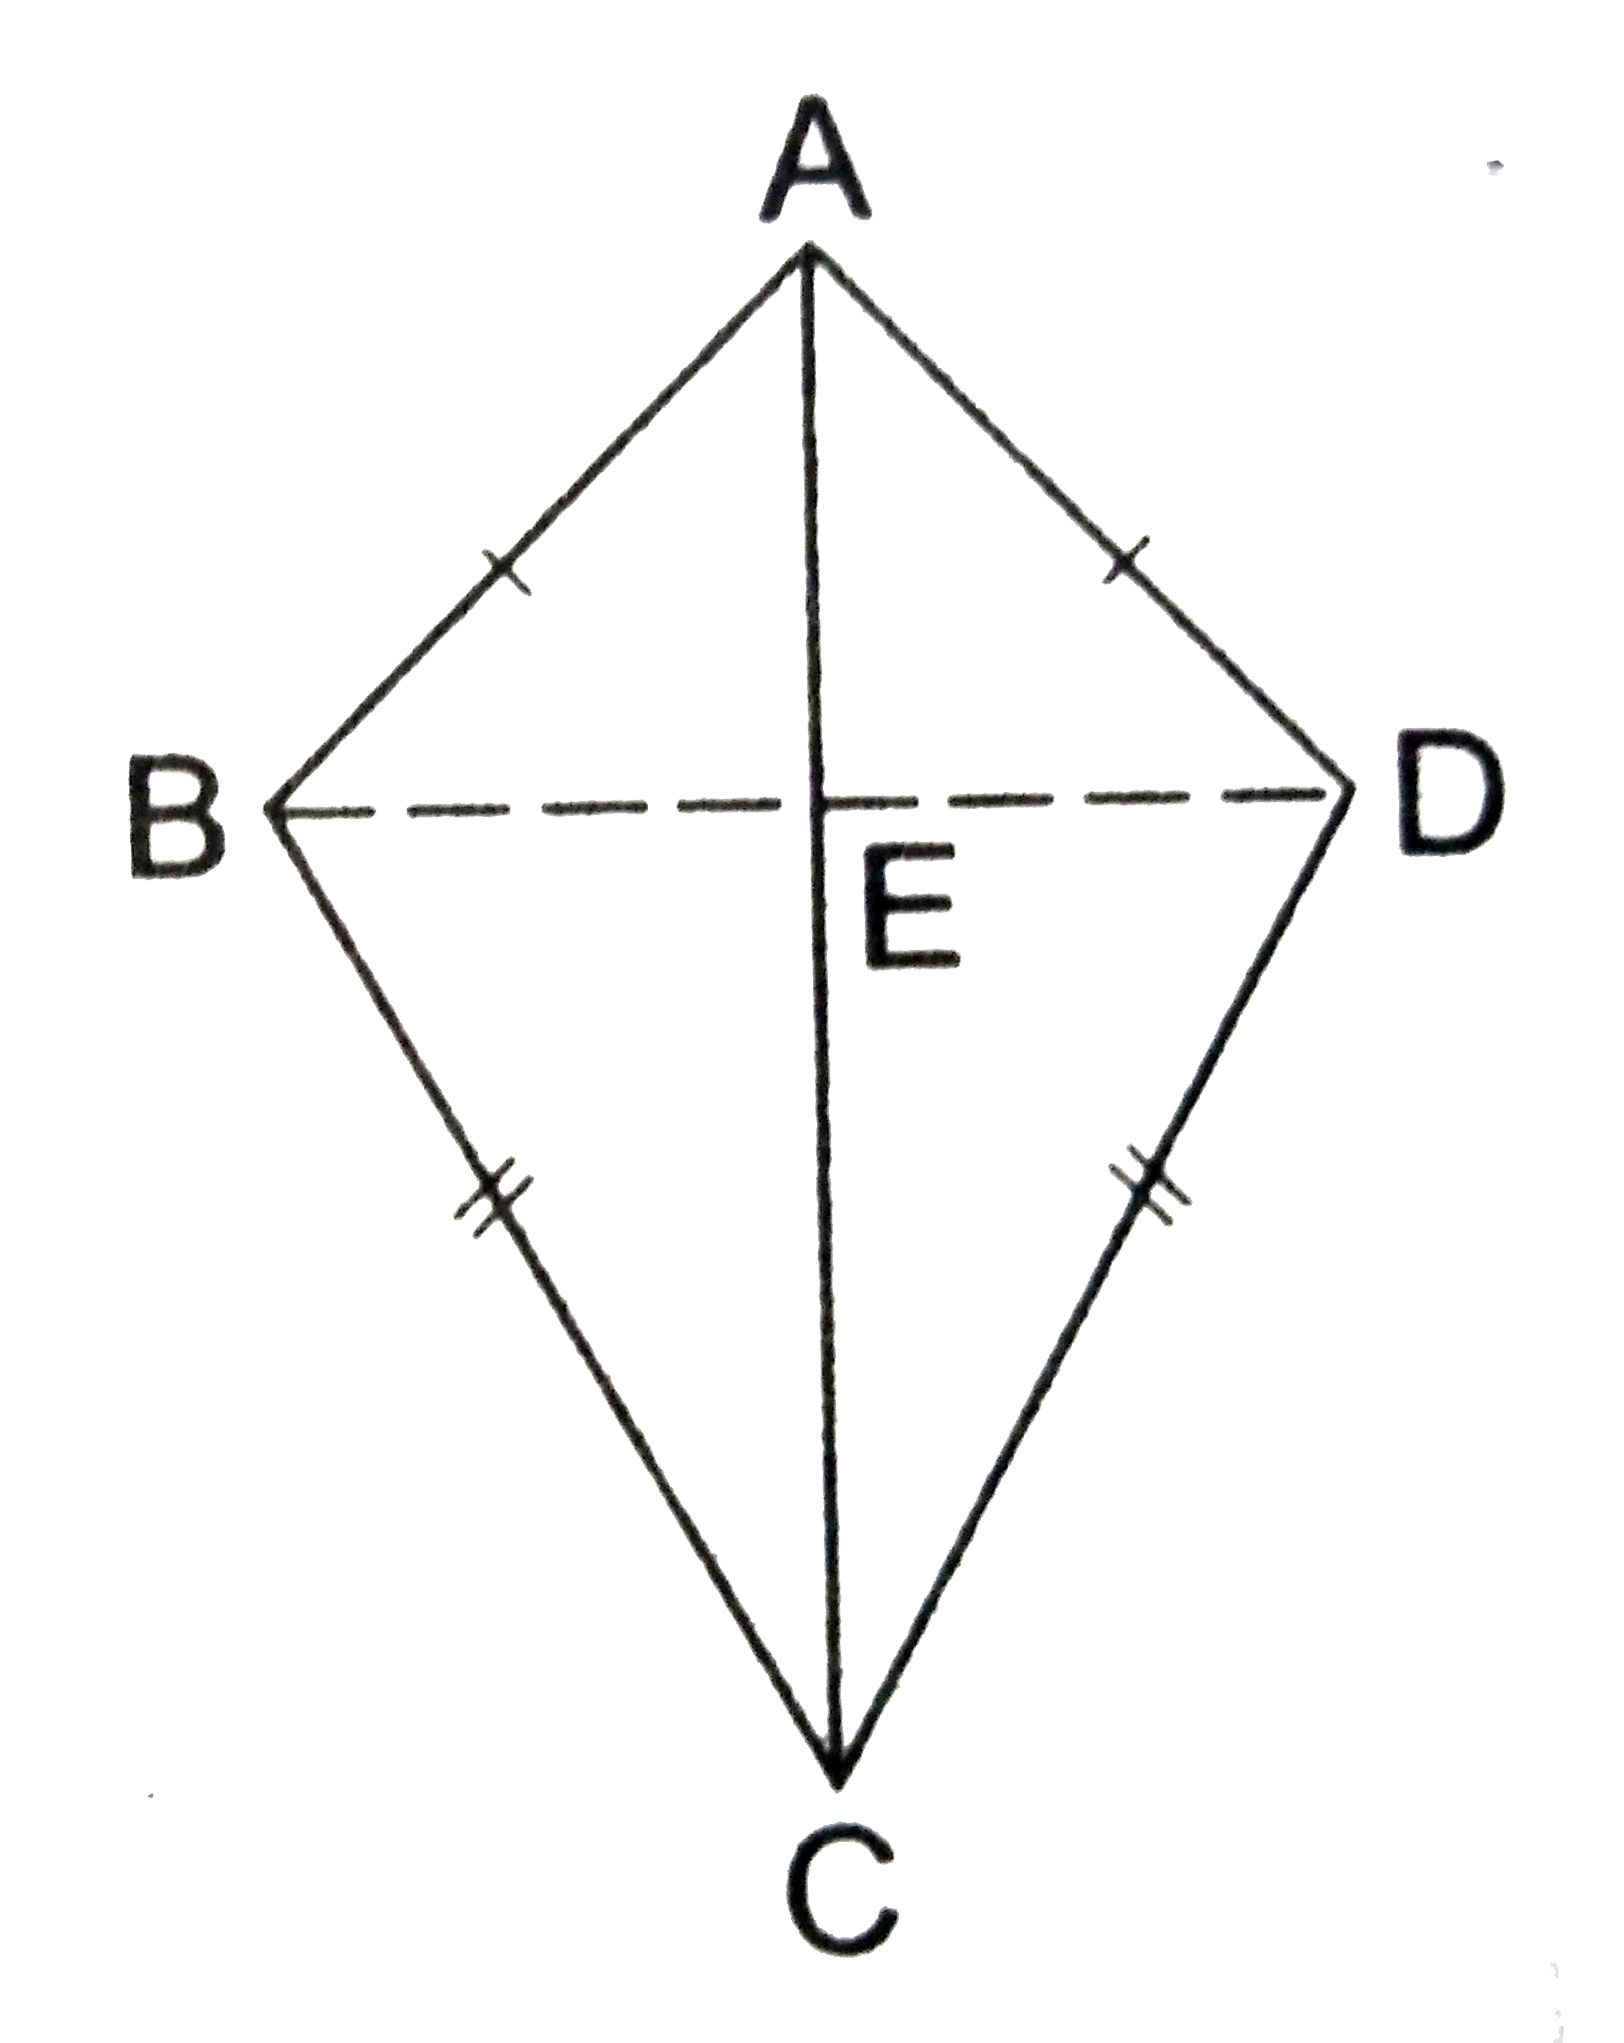 In the given figure, ABCD is a quadrilateral  in which AB = AD and BC = DC, Prove that   (i) AC bisects  angle A and angle C,